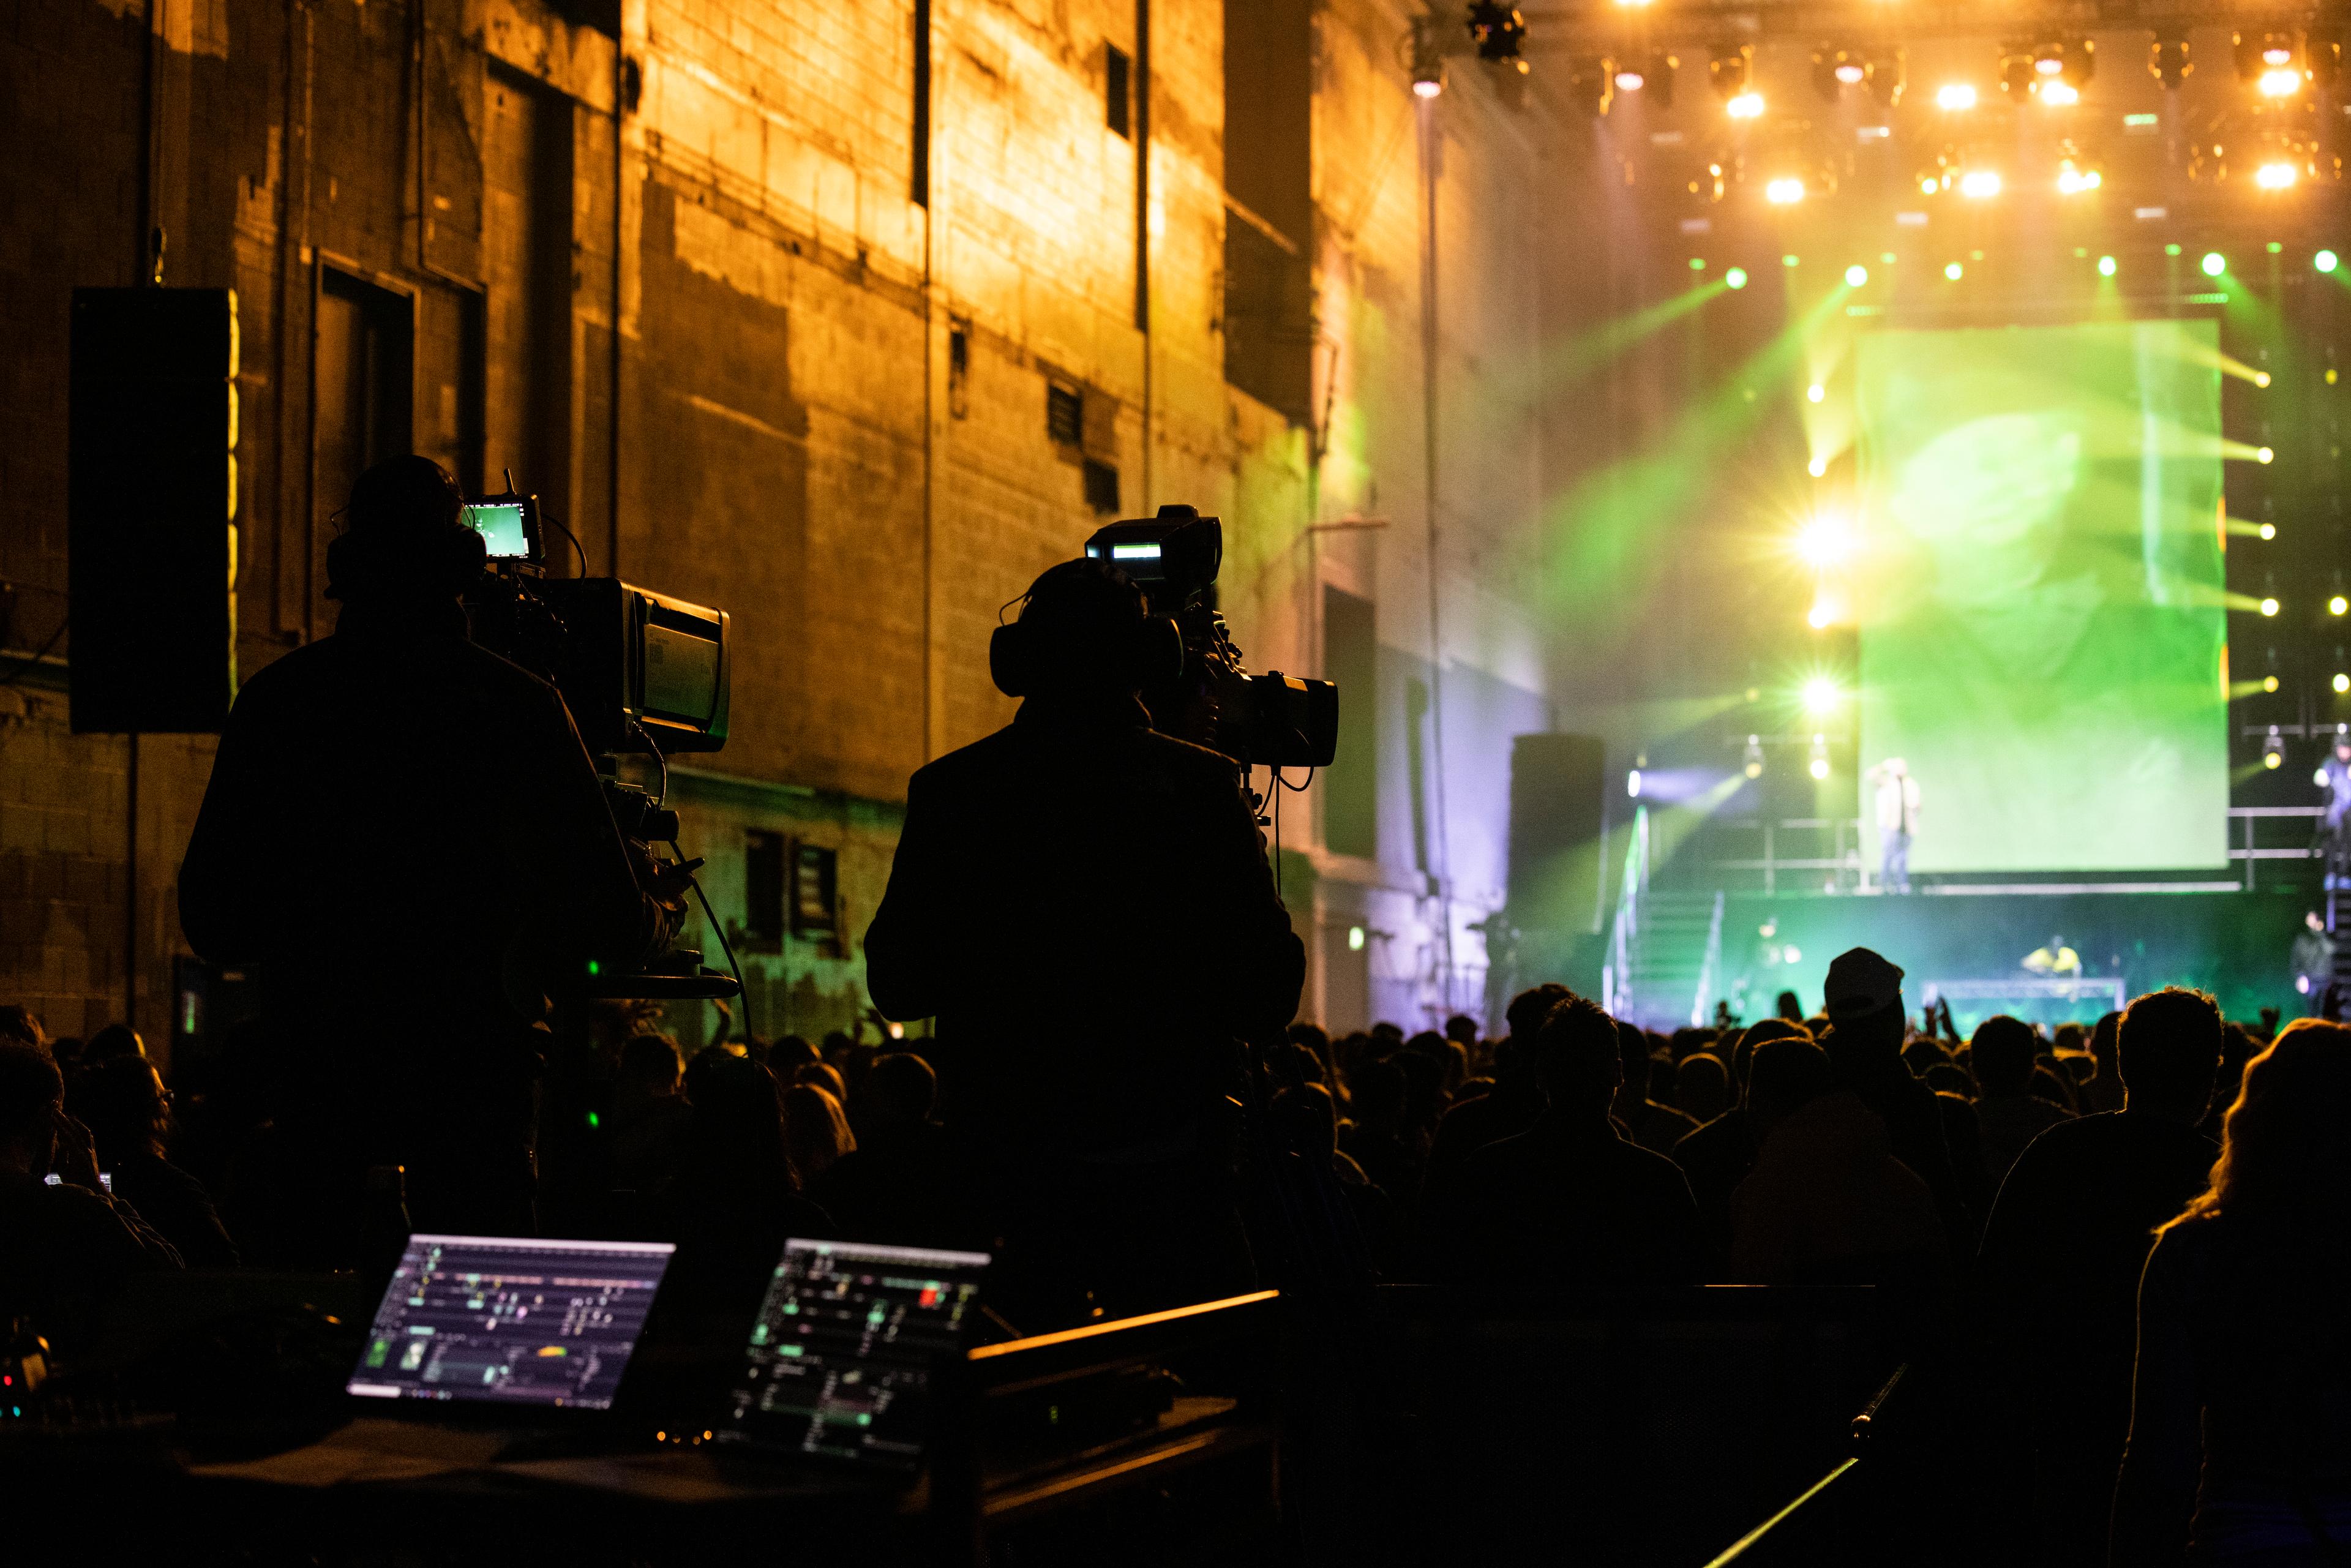 Kurupt FM live on stage at Printworks London shot from behind the broadcast  cameras